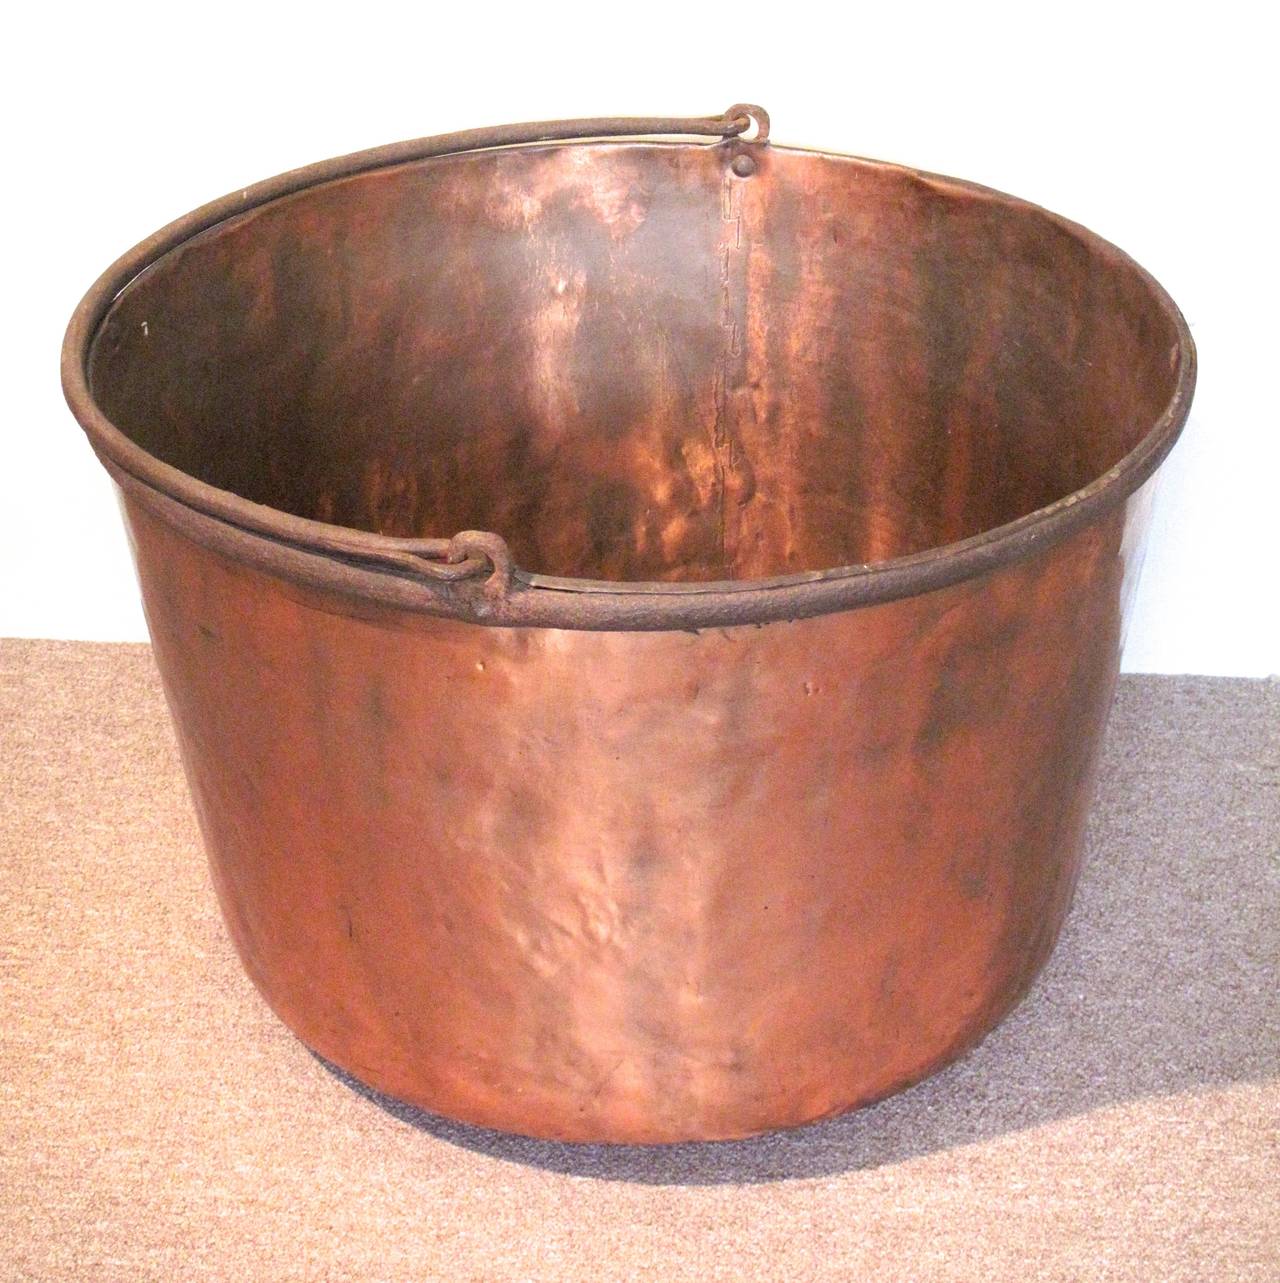 An exceptionally large and sturdy 19th century copper kettle with dovetailed construction and an iron rim and handle.